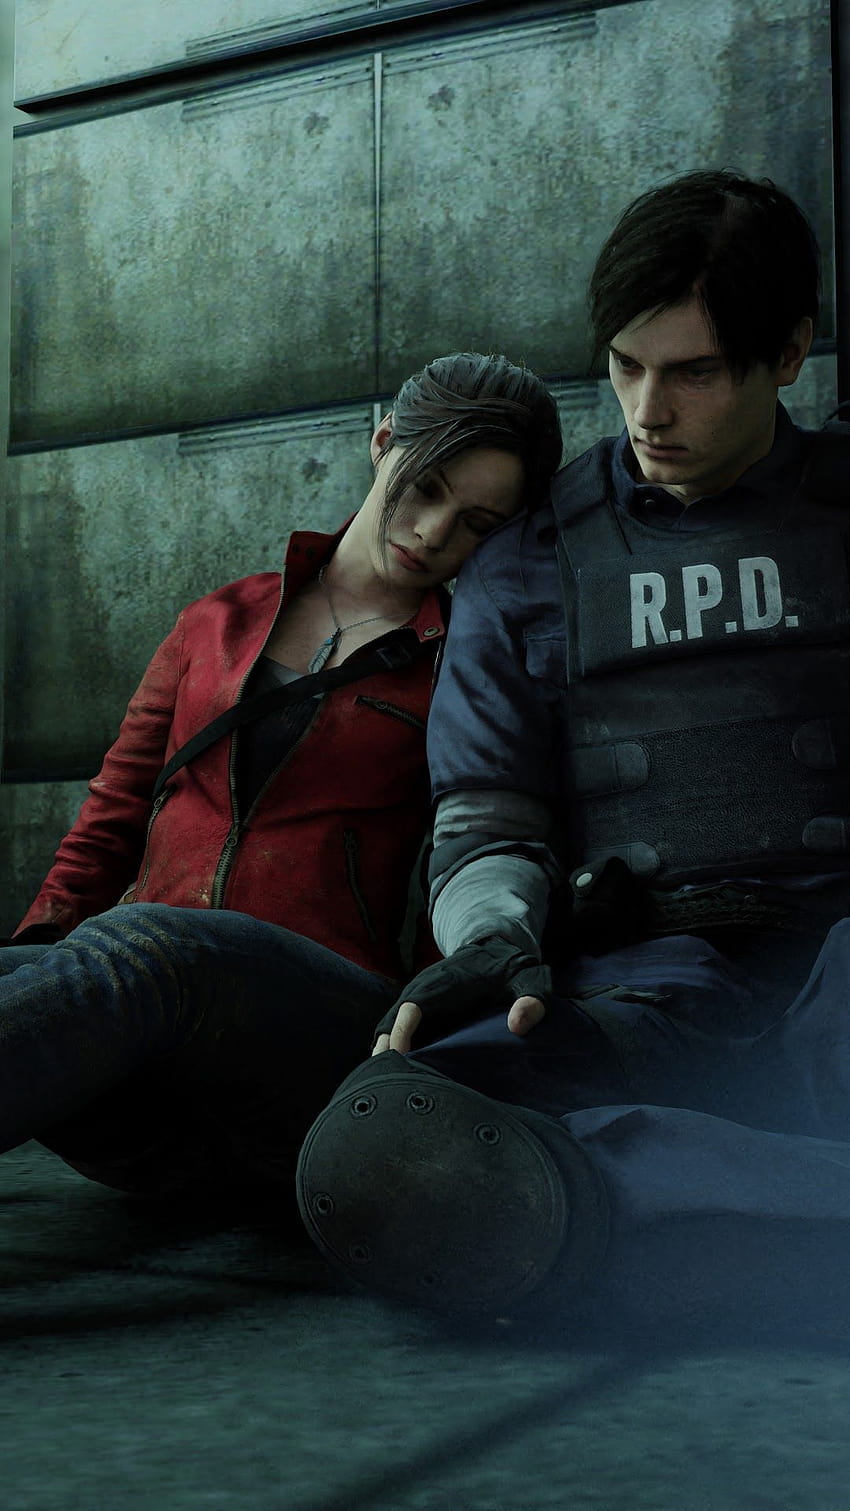 Claire Redfield Leon S. Kennedy Resident Evil 2, leon kennedy ve claire redfield HD telefon duvar kağıdı